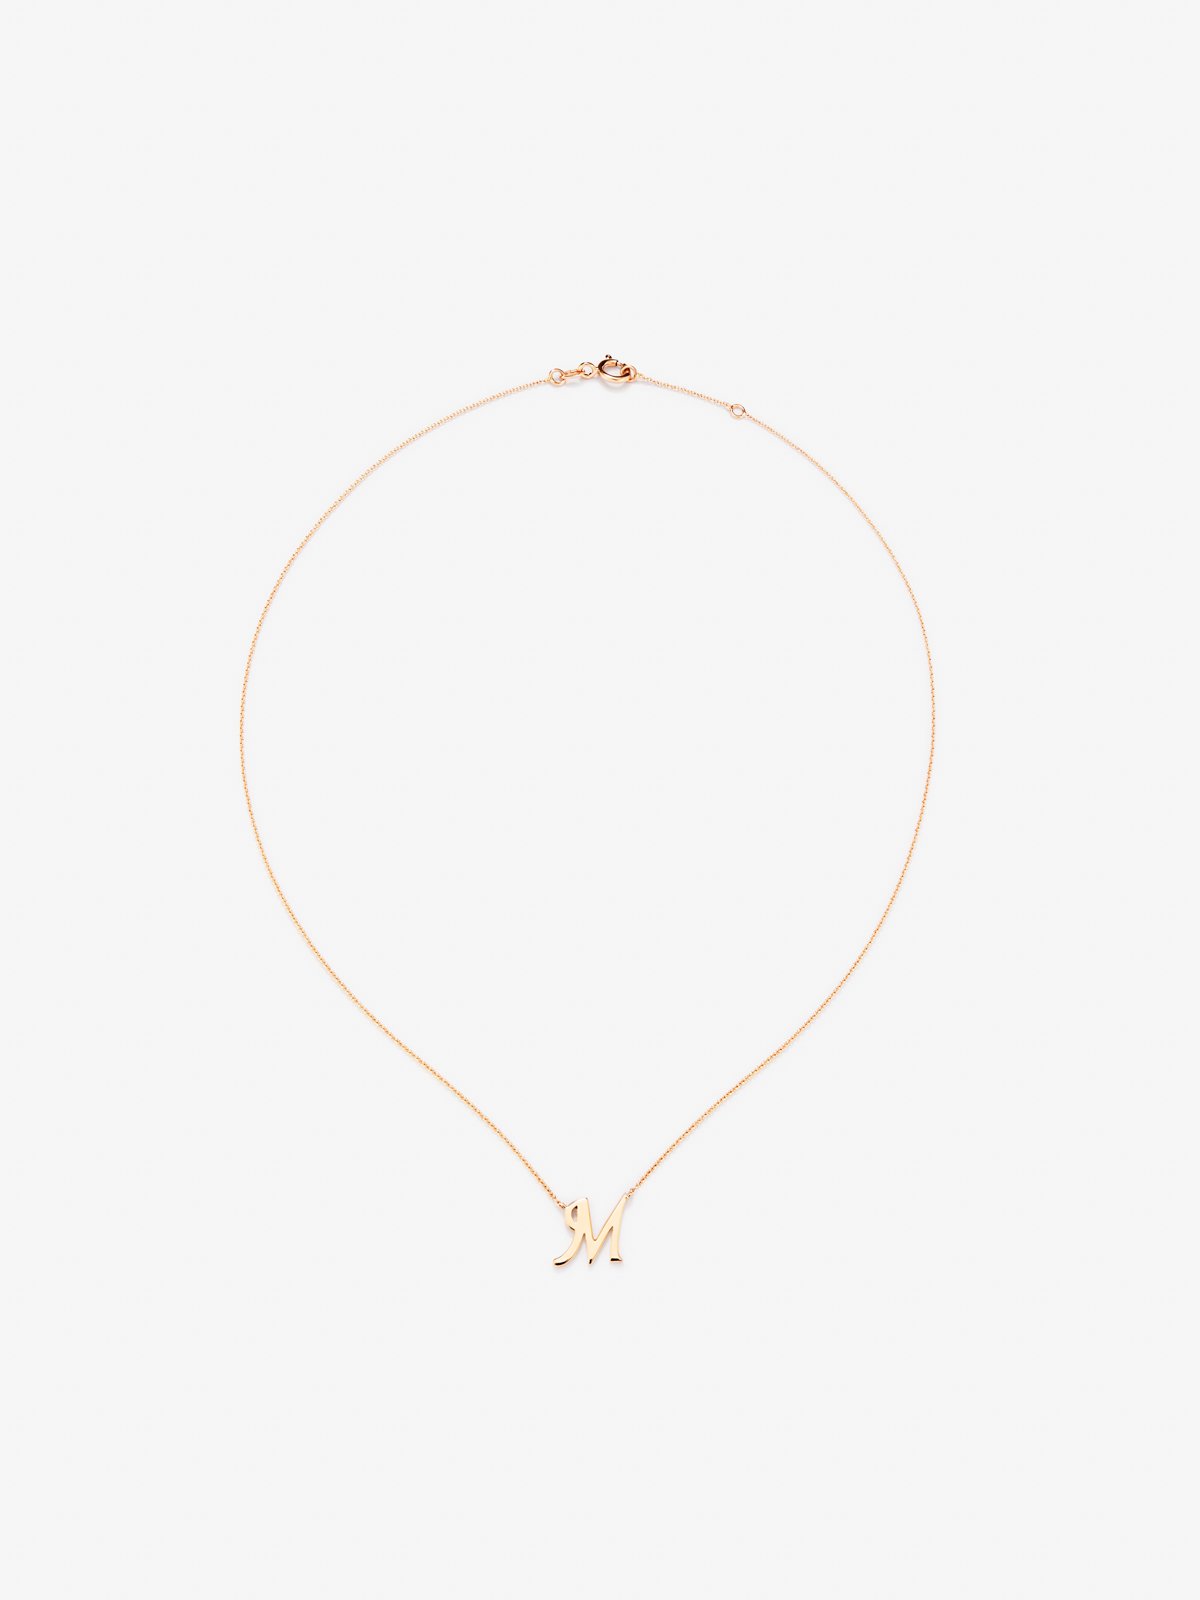 Pendant chain with initial 'm' in 18K rose gold.